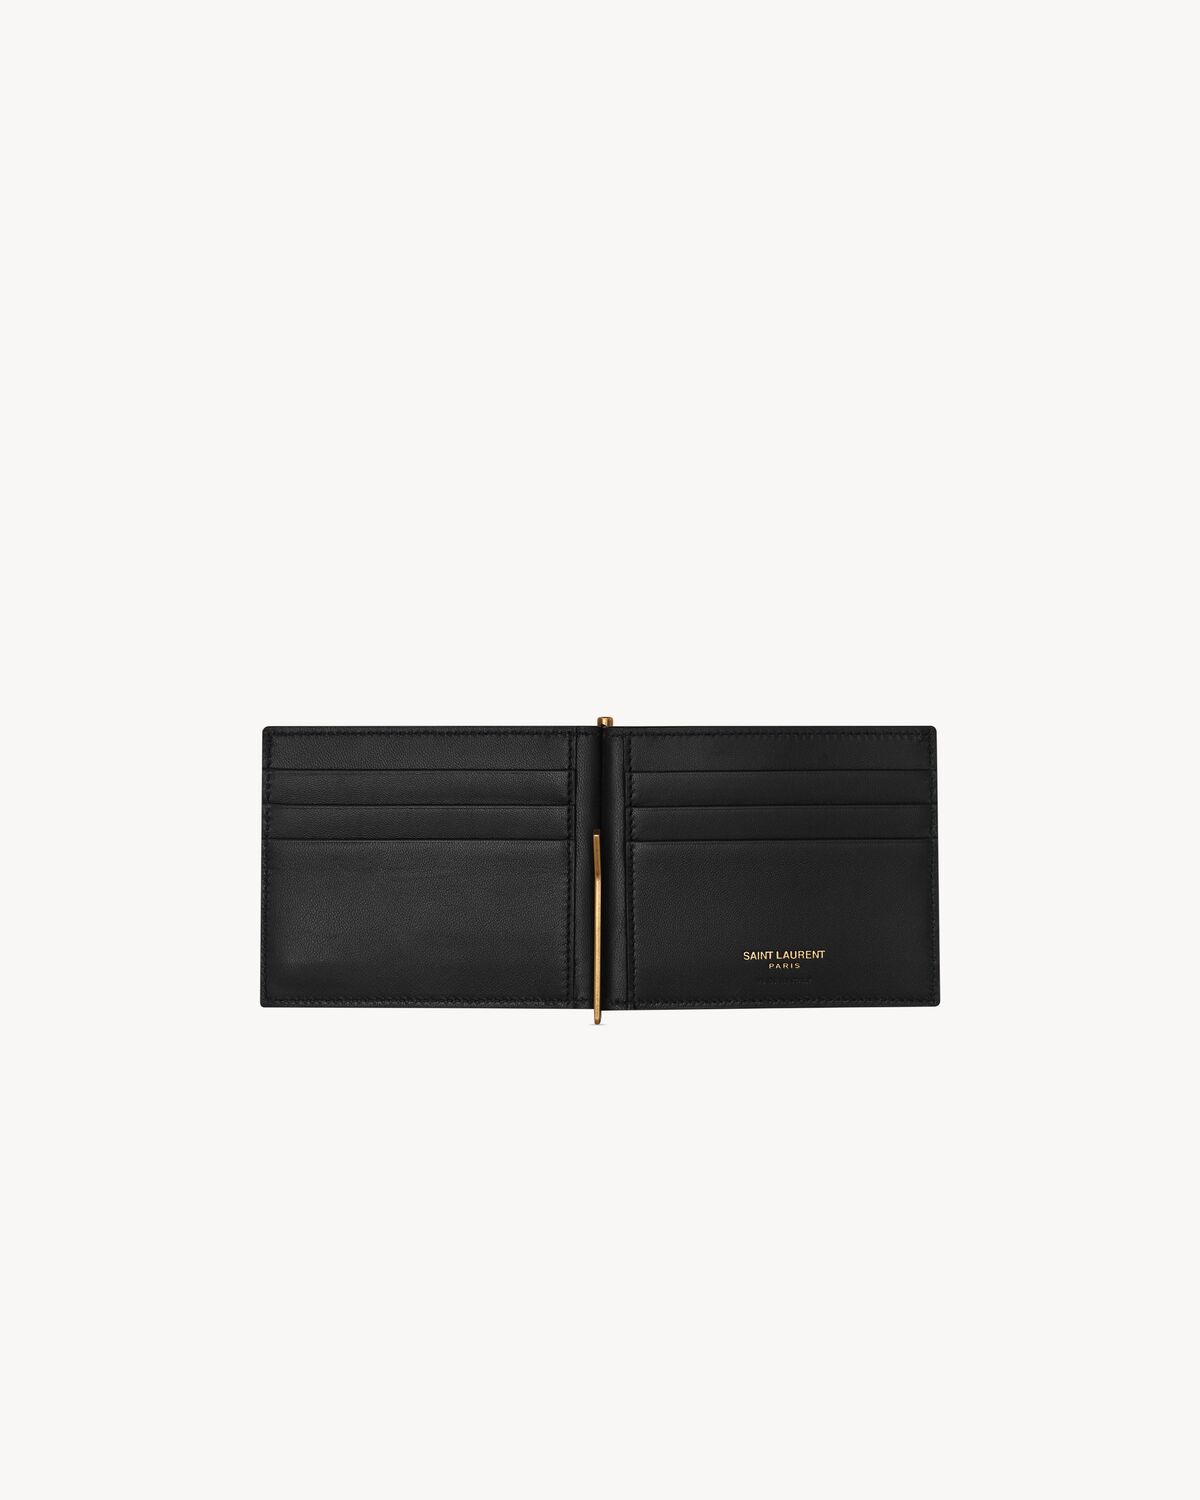 TINY CASSANDRE Bill clip wallet in CROCODILE-EMBOSSED matte leather